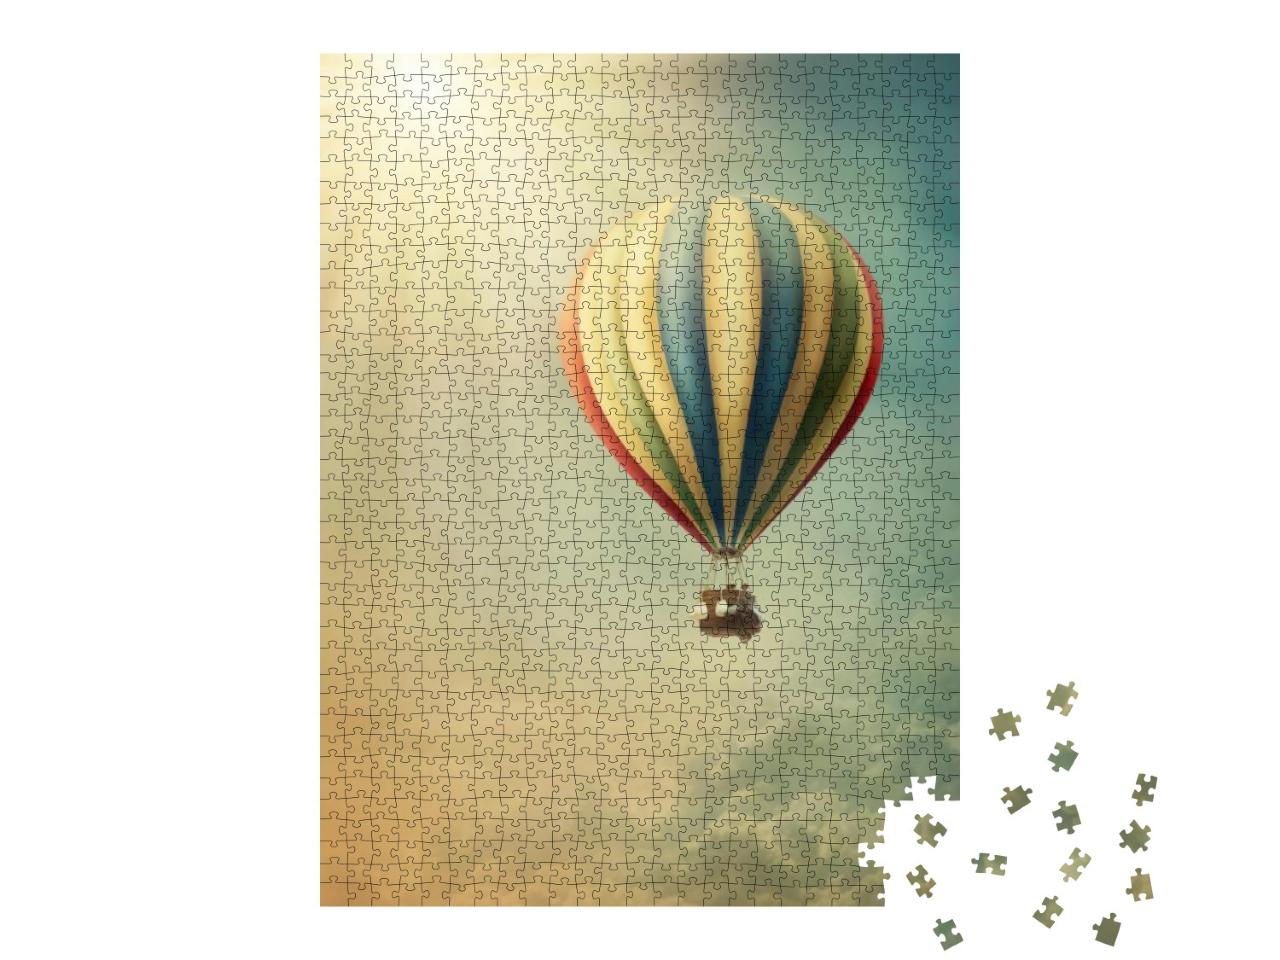 Hot Air Balloon High in the Sky... Jigsaw Puzzle with 1000 pieces